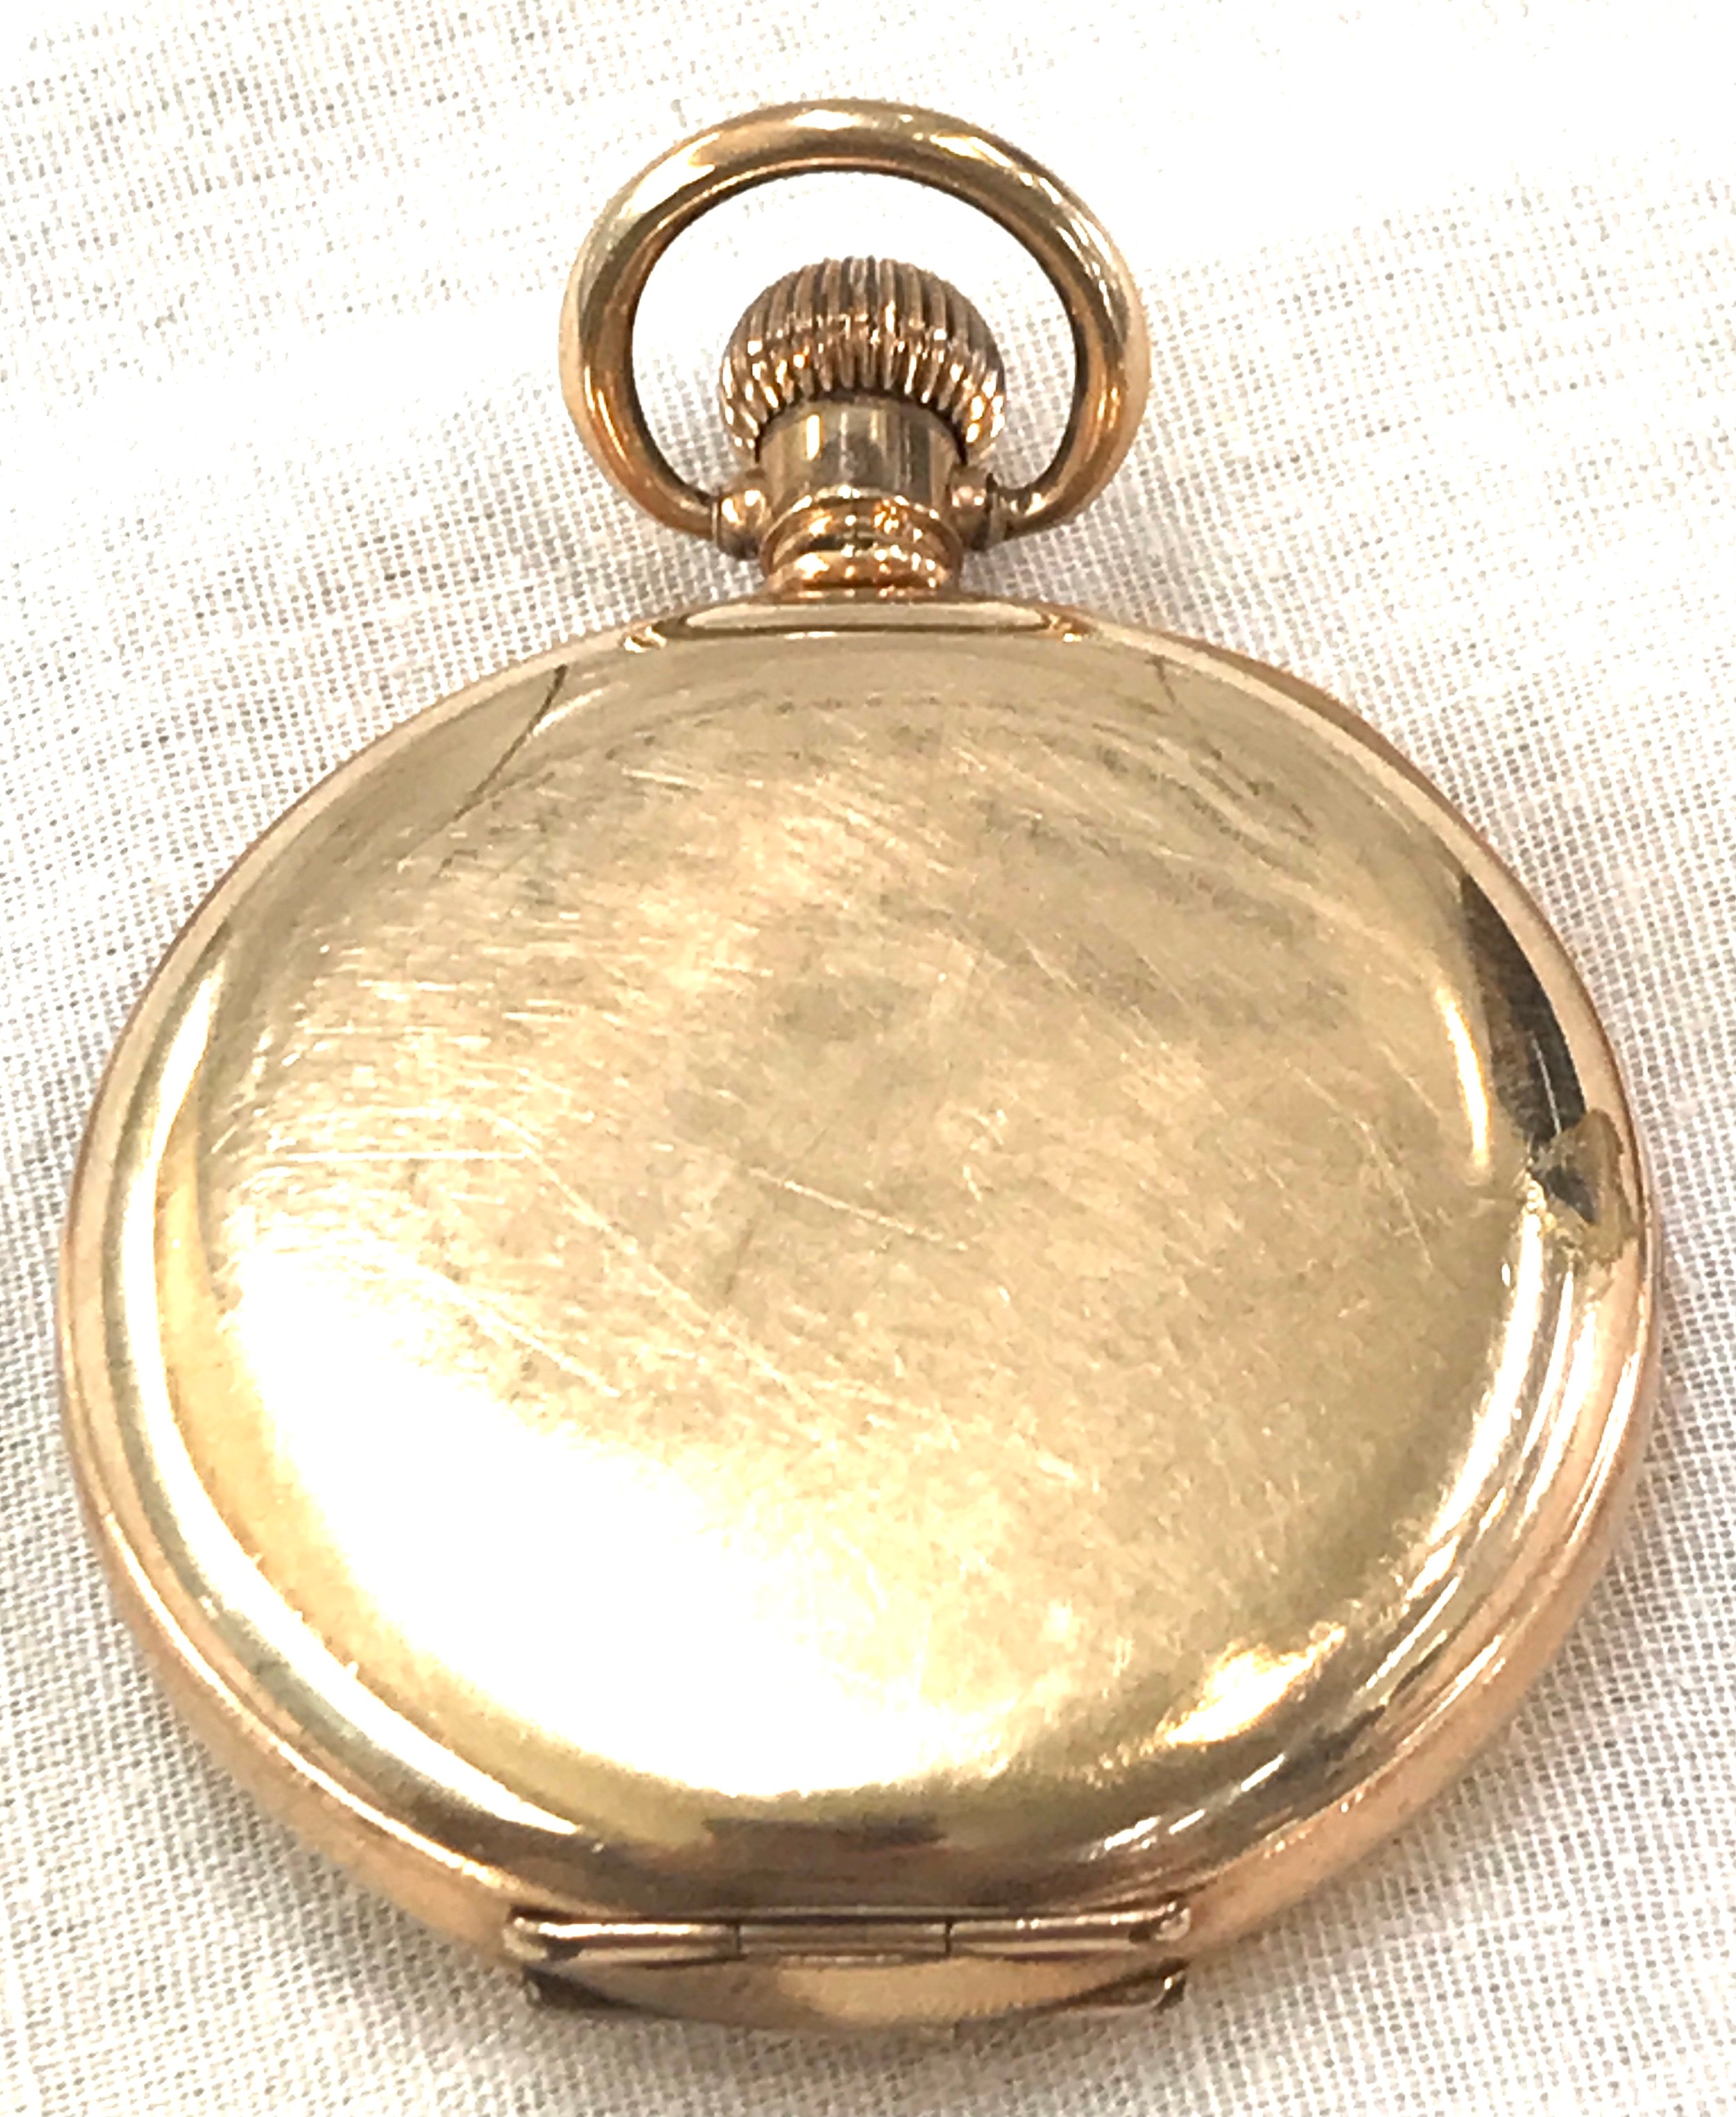 Gold plated full hunter Waltham pocket watch, untested - Image 4 of 4